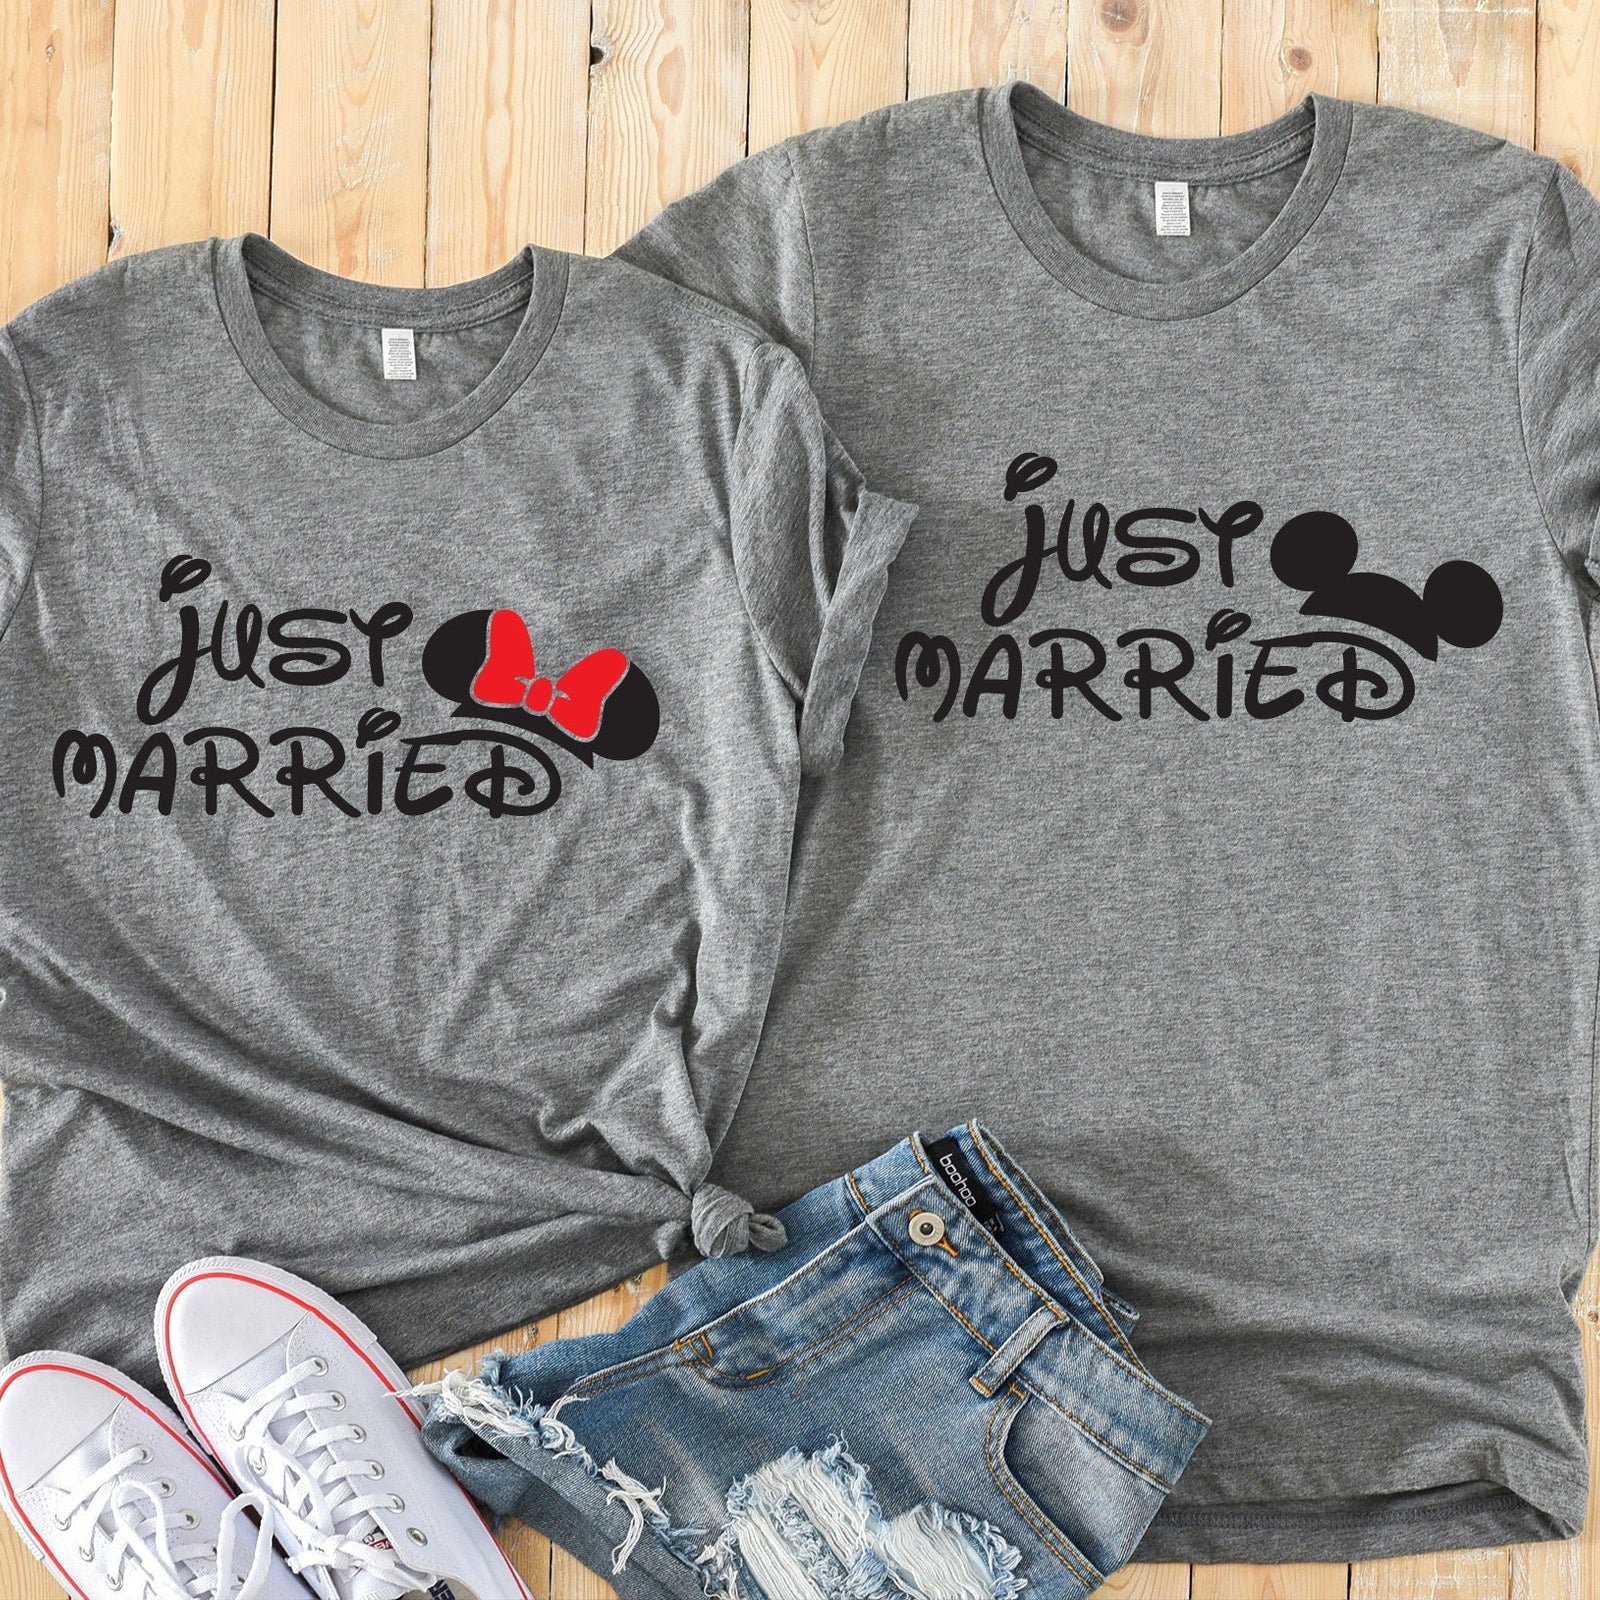 Just Married - Disney Couples Matching Unisex T Shirts - Mickey and Minnie Mouse - Anniversary - Honey Moon - Disney Moon